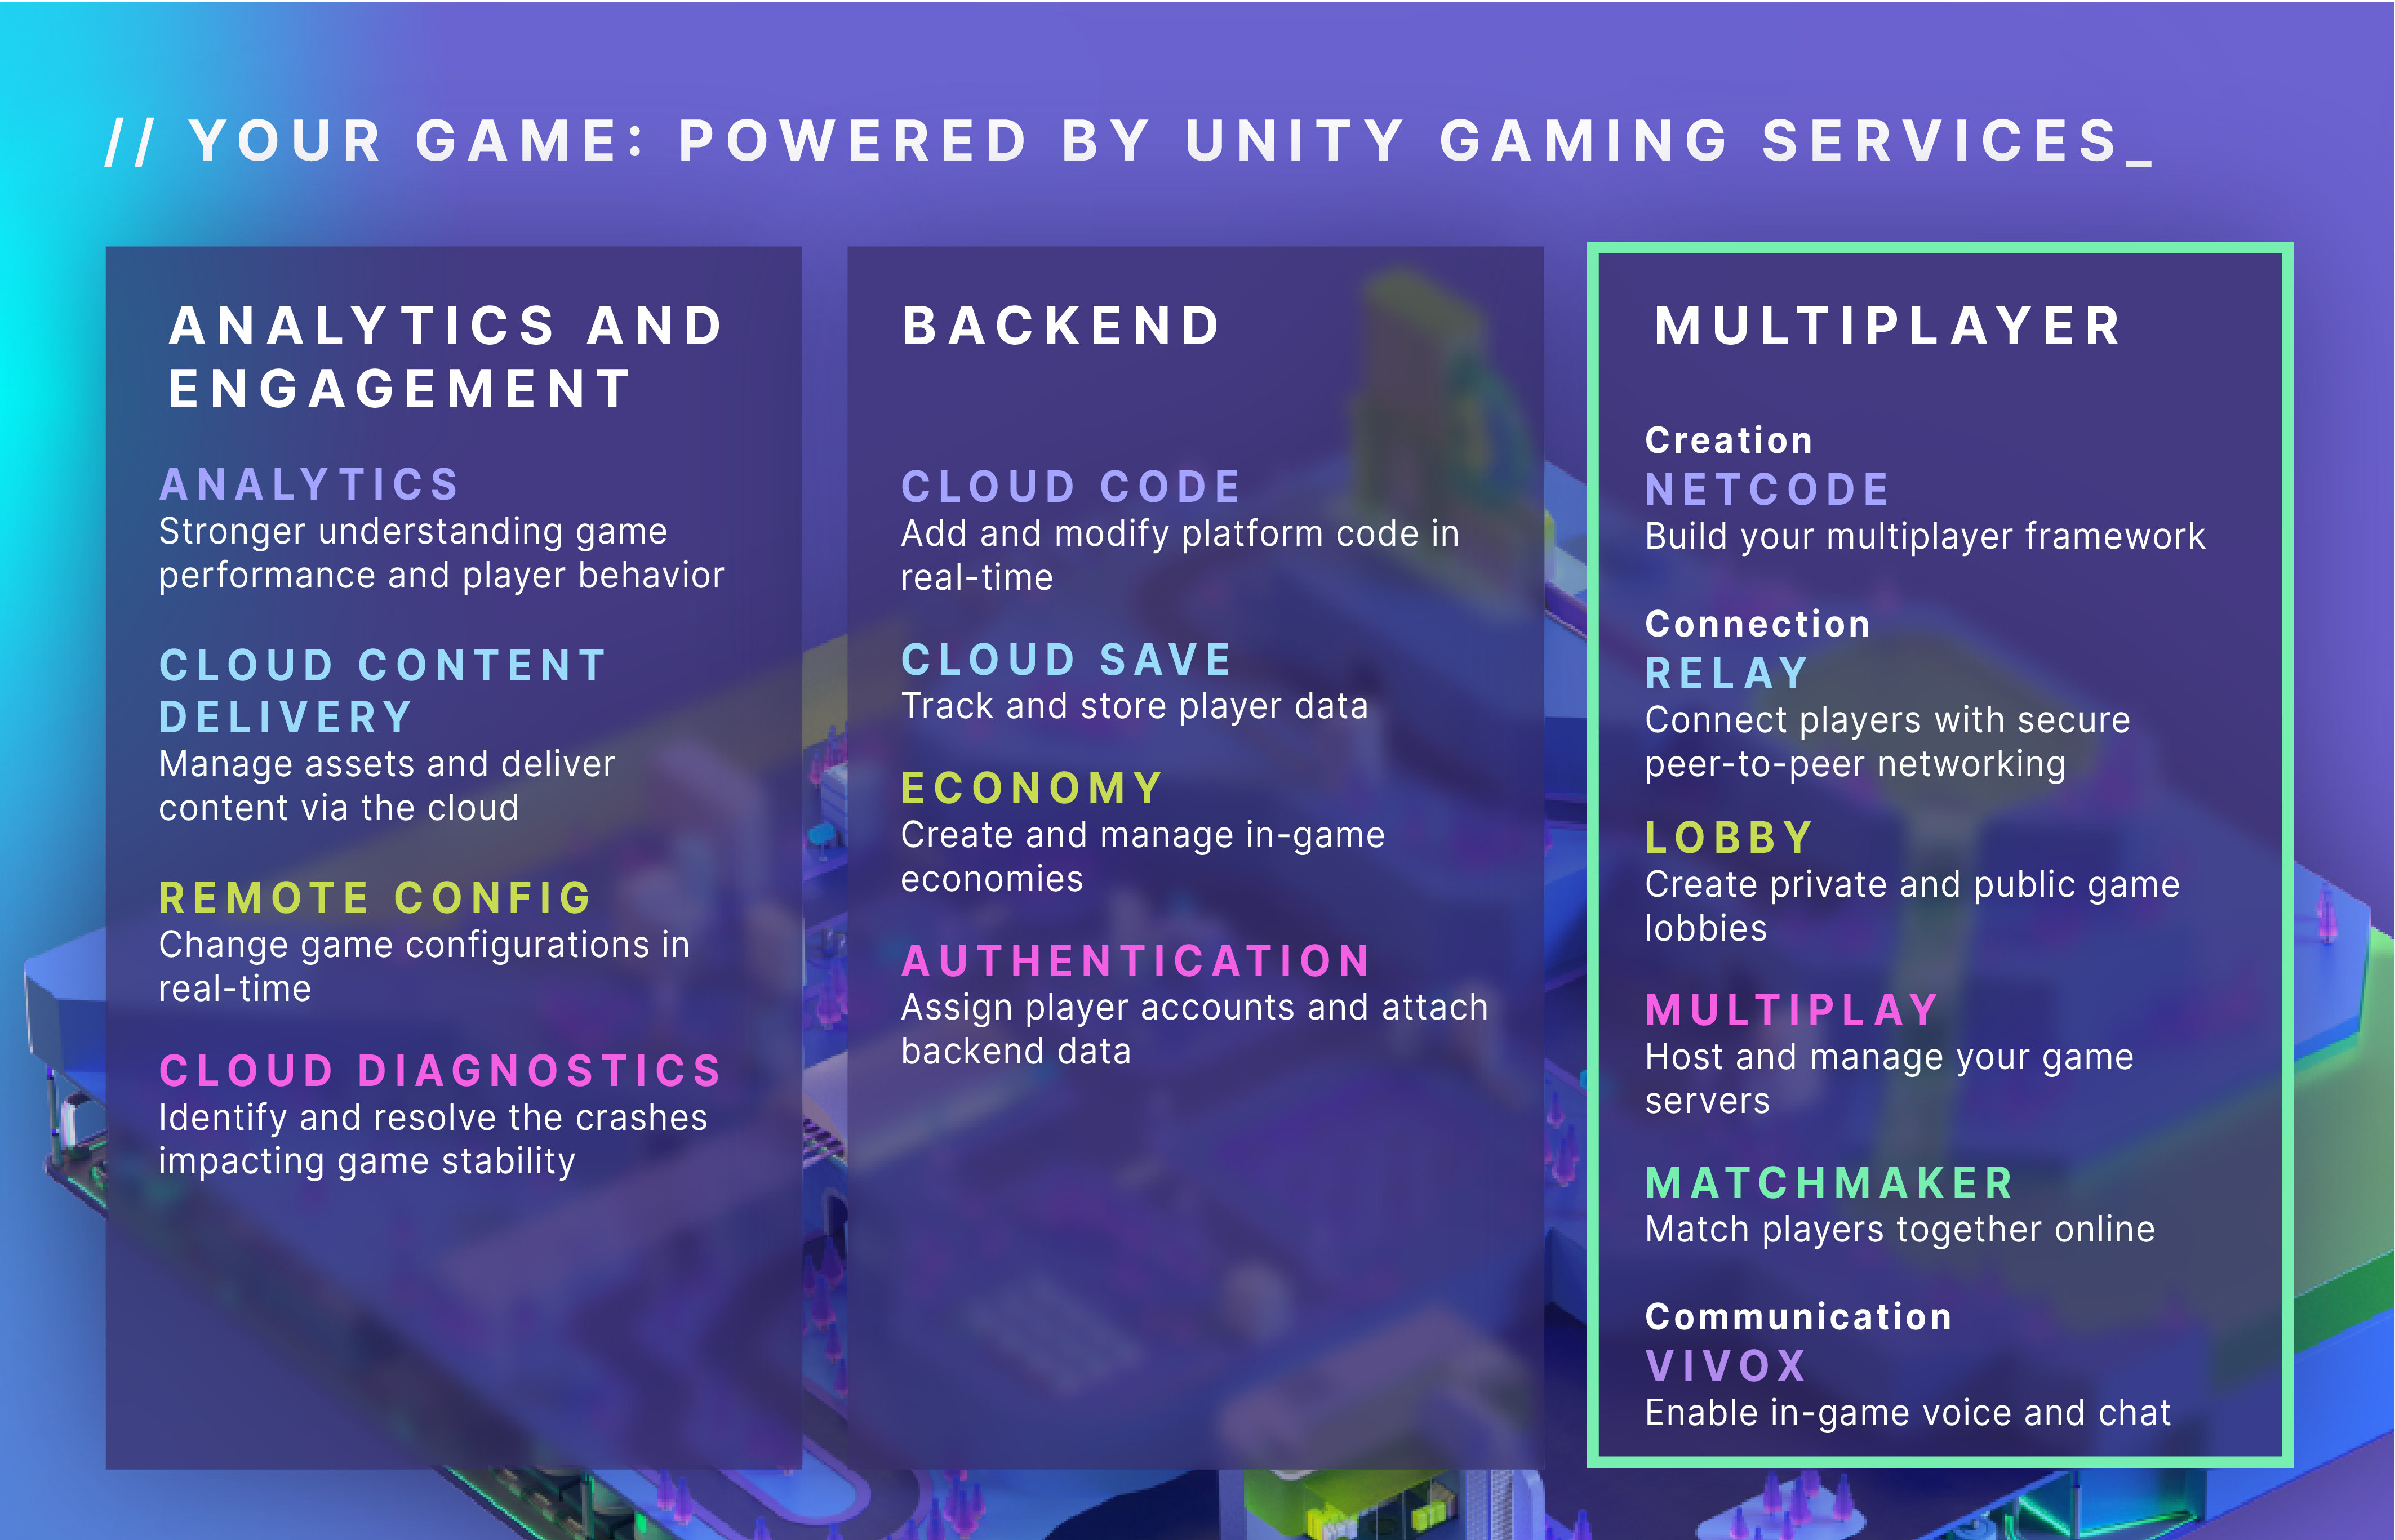 Table showing different Unity Gaming Services pillars (Multiplayer highlighted)